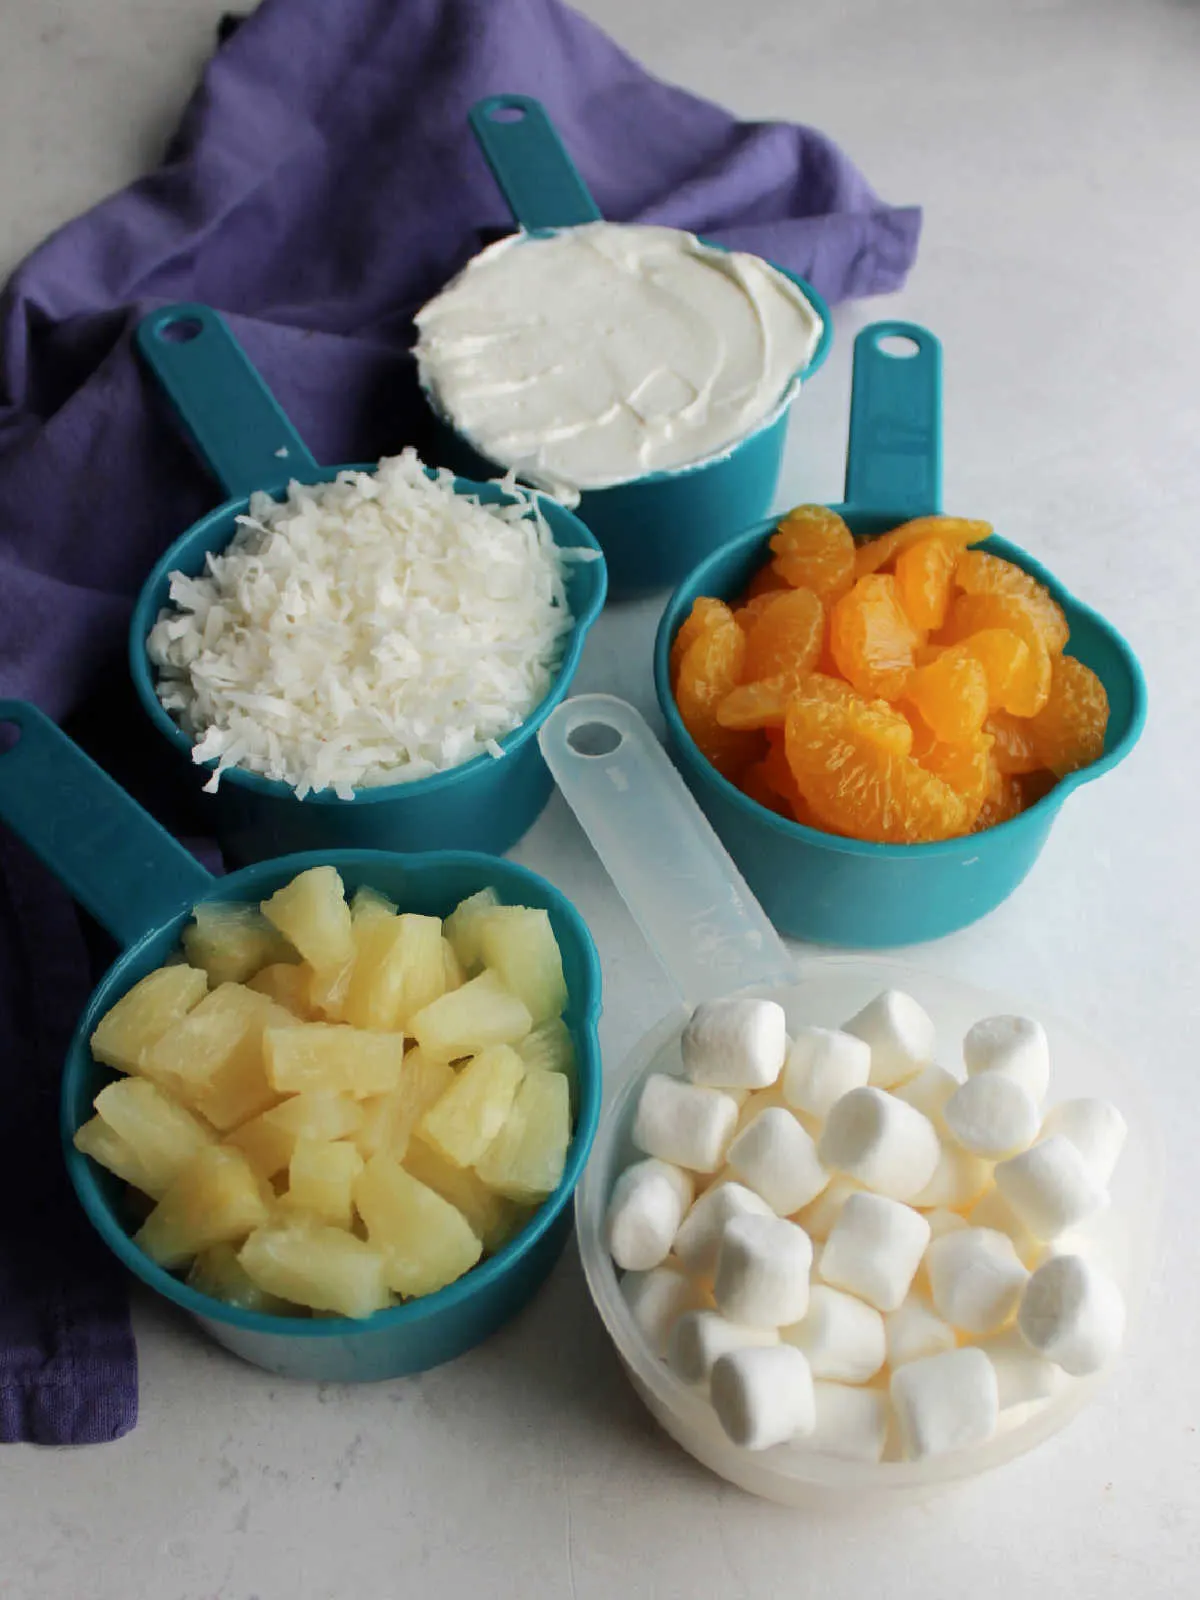 Ingredients including oranges, pineapple, coconut, sour cream and marshmallows ready to be made into 5 cup salad.